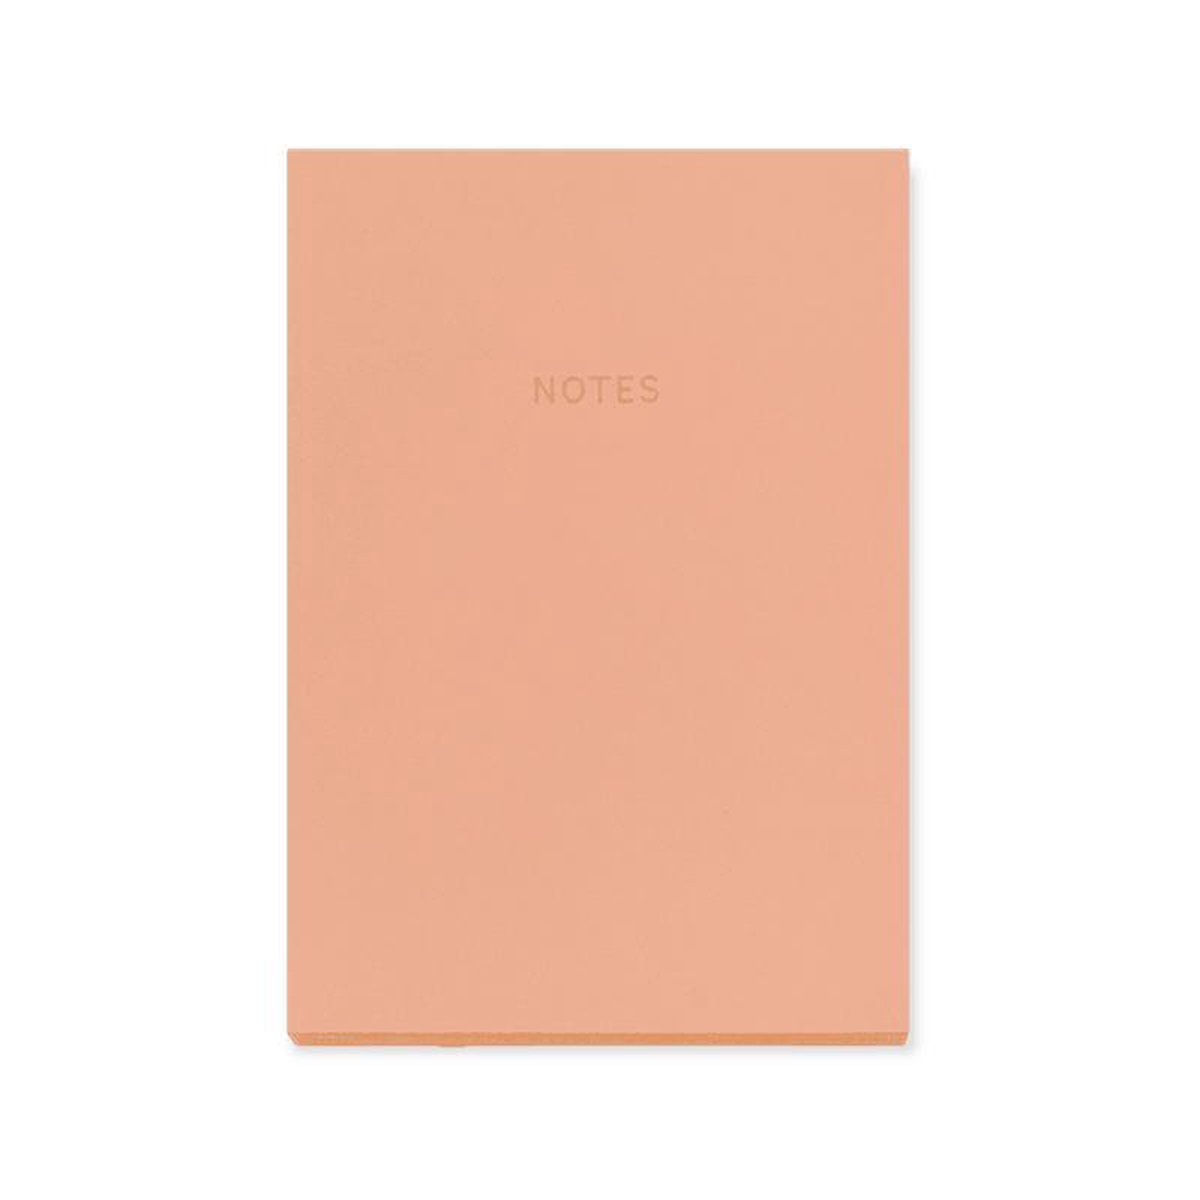 Go Stationery - Colorblock A5 Notebook - 160 pagina's